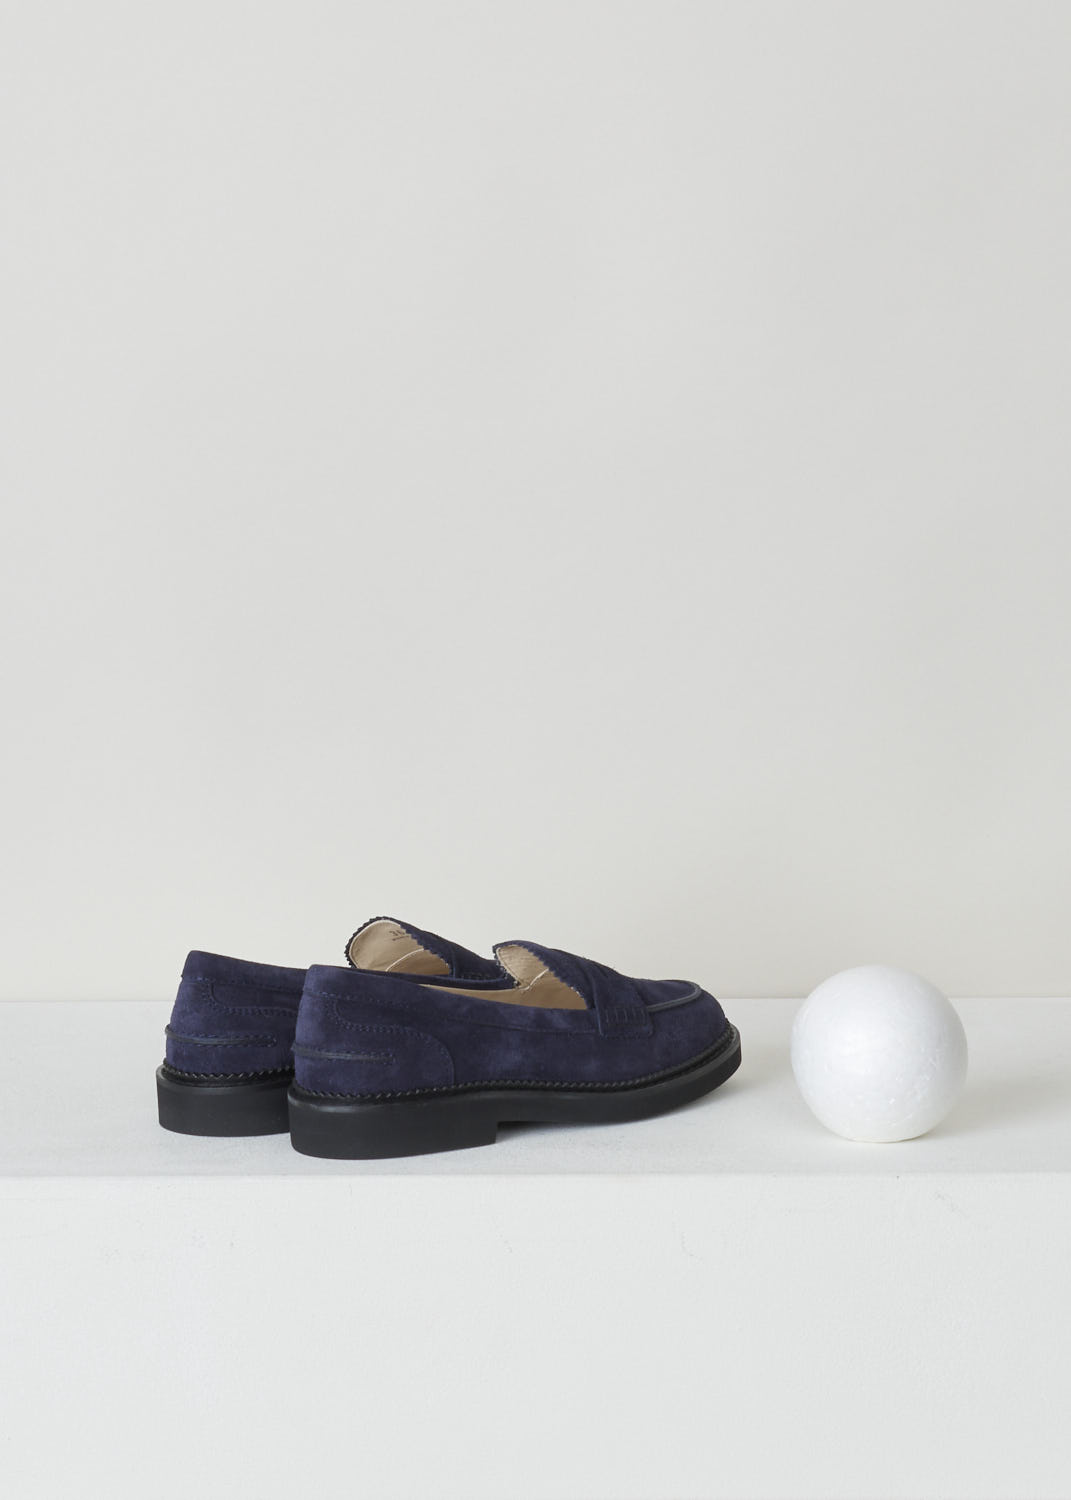 TODS, BLUE SUEDE PENNY LOAFERS, XXW76B0BP10RE0U824, Blue, Back, These blue suede slip-on penny loafers have a rounded toe and a decorative slotted leather strip over the upper side. The upper side being decorated with serrated edges. These loafers have black soles. 
